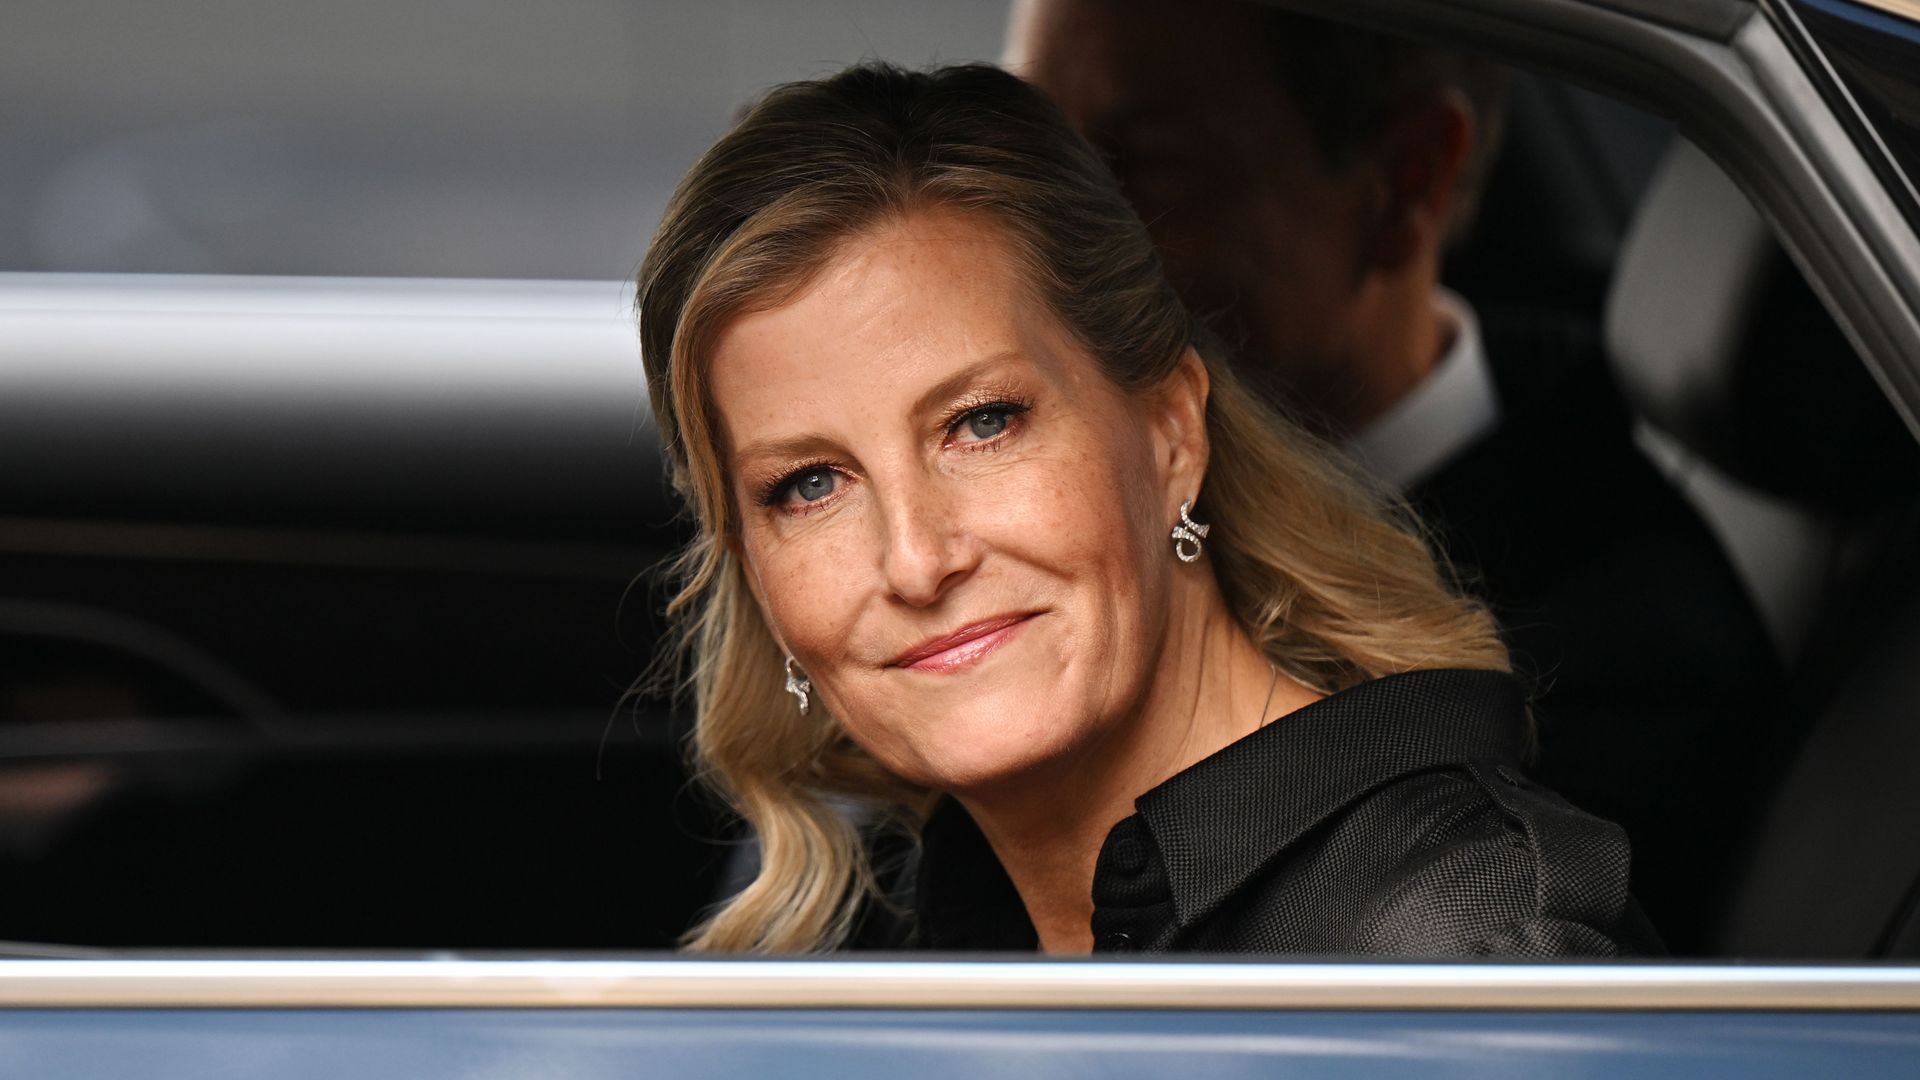 Duchess Sophie smiling in black looking out of a car window